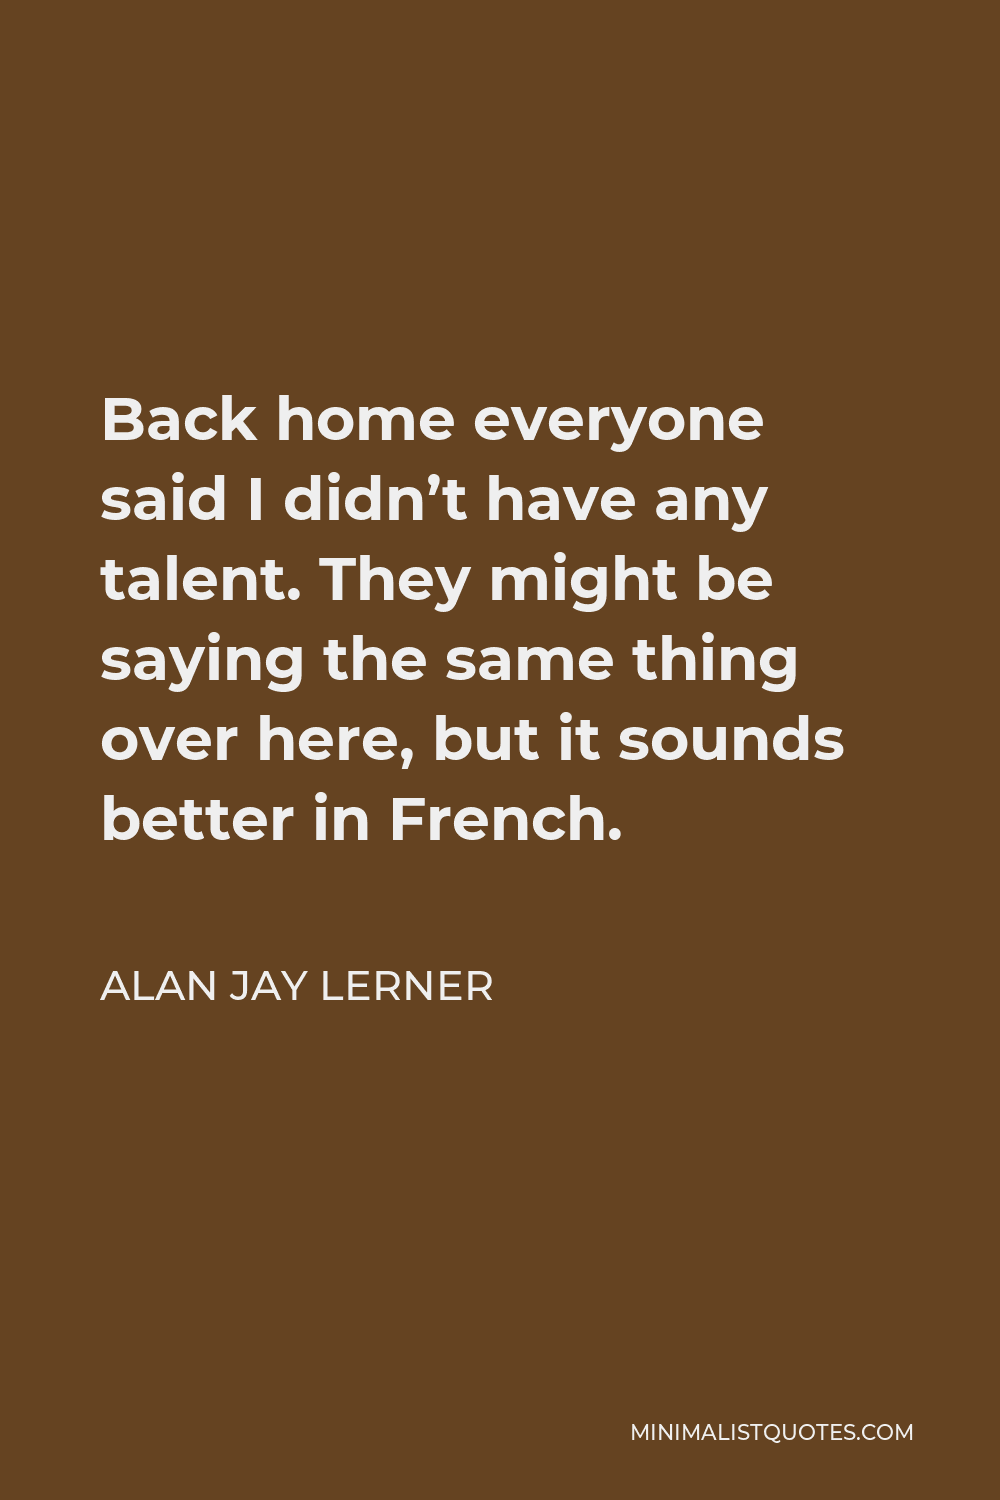 Alan Jay Lerner Quote - Back home everyone said I didn’t have any talent. They might be saying the same thing over here, but it sounds better in French.